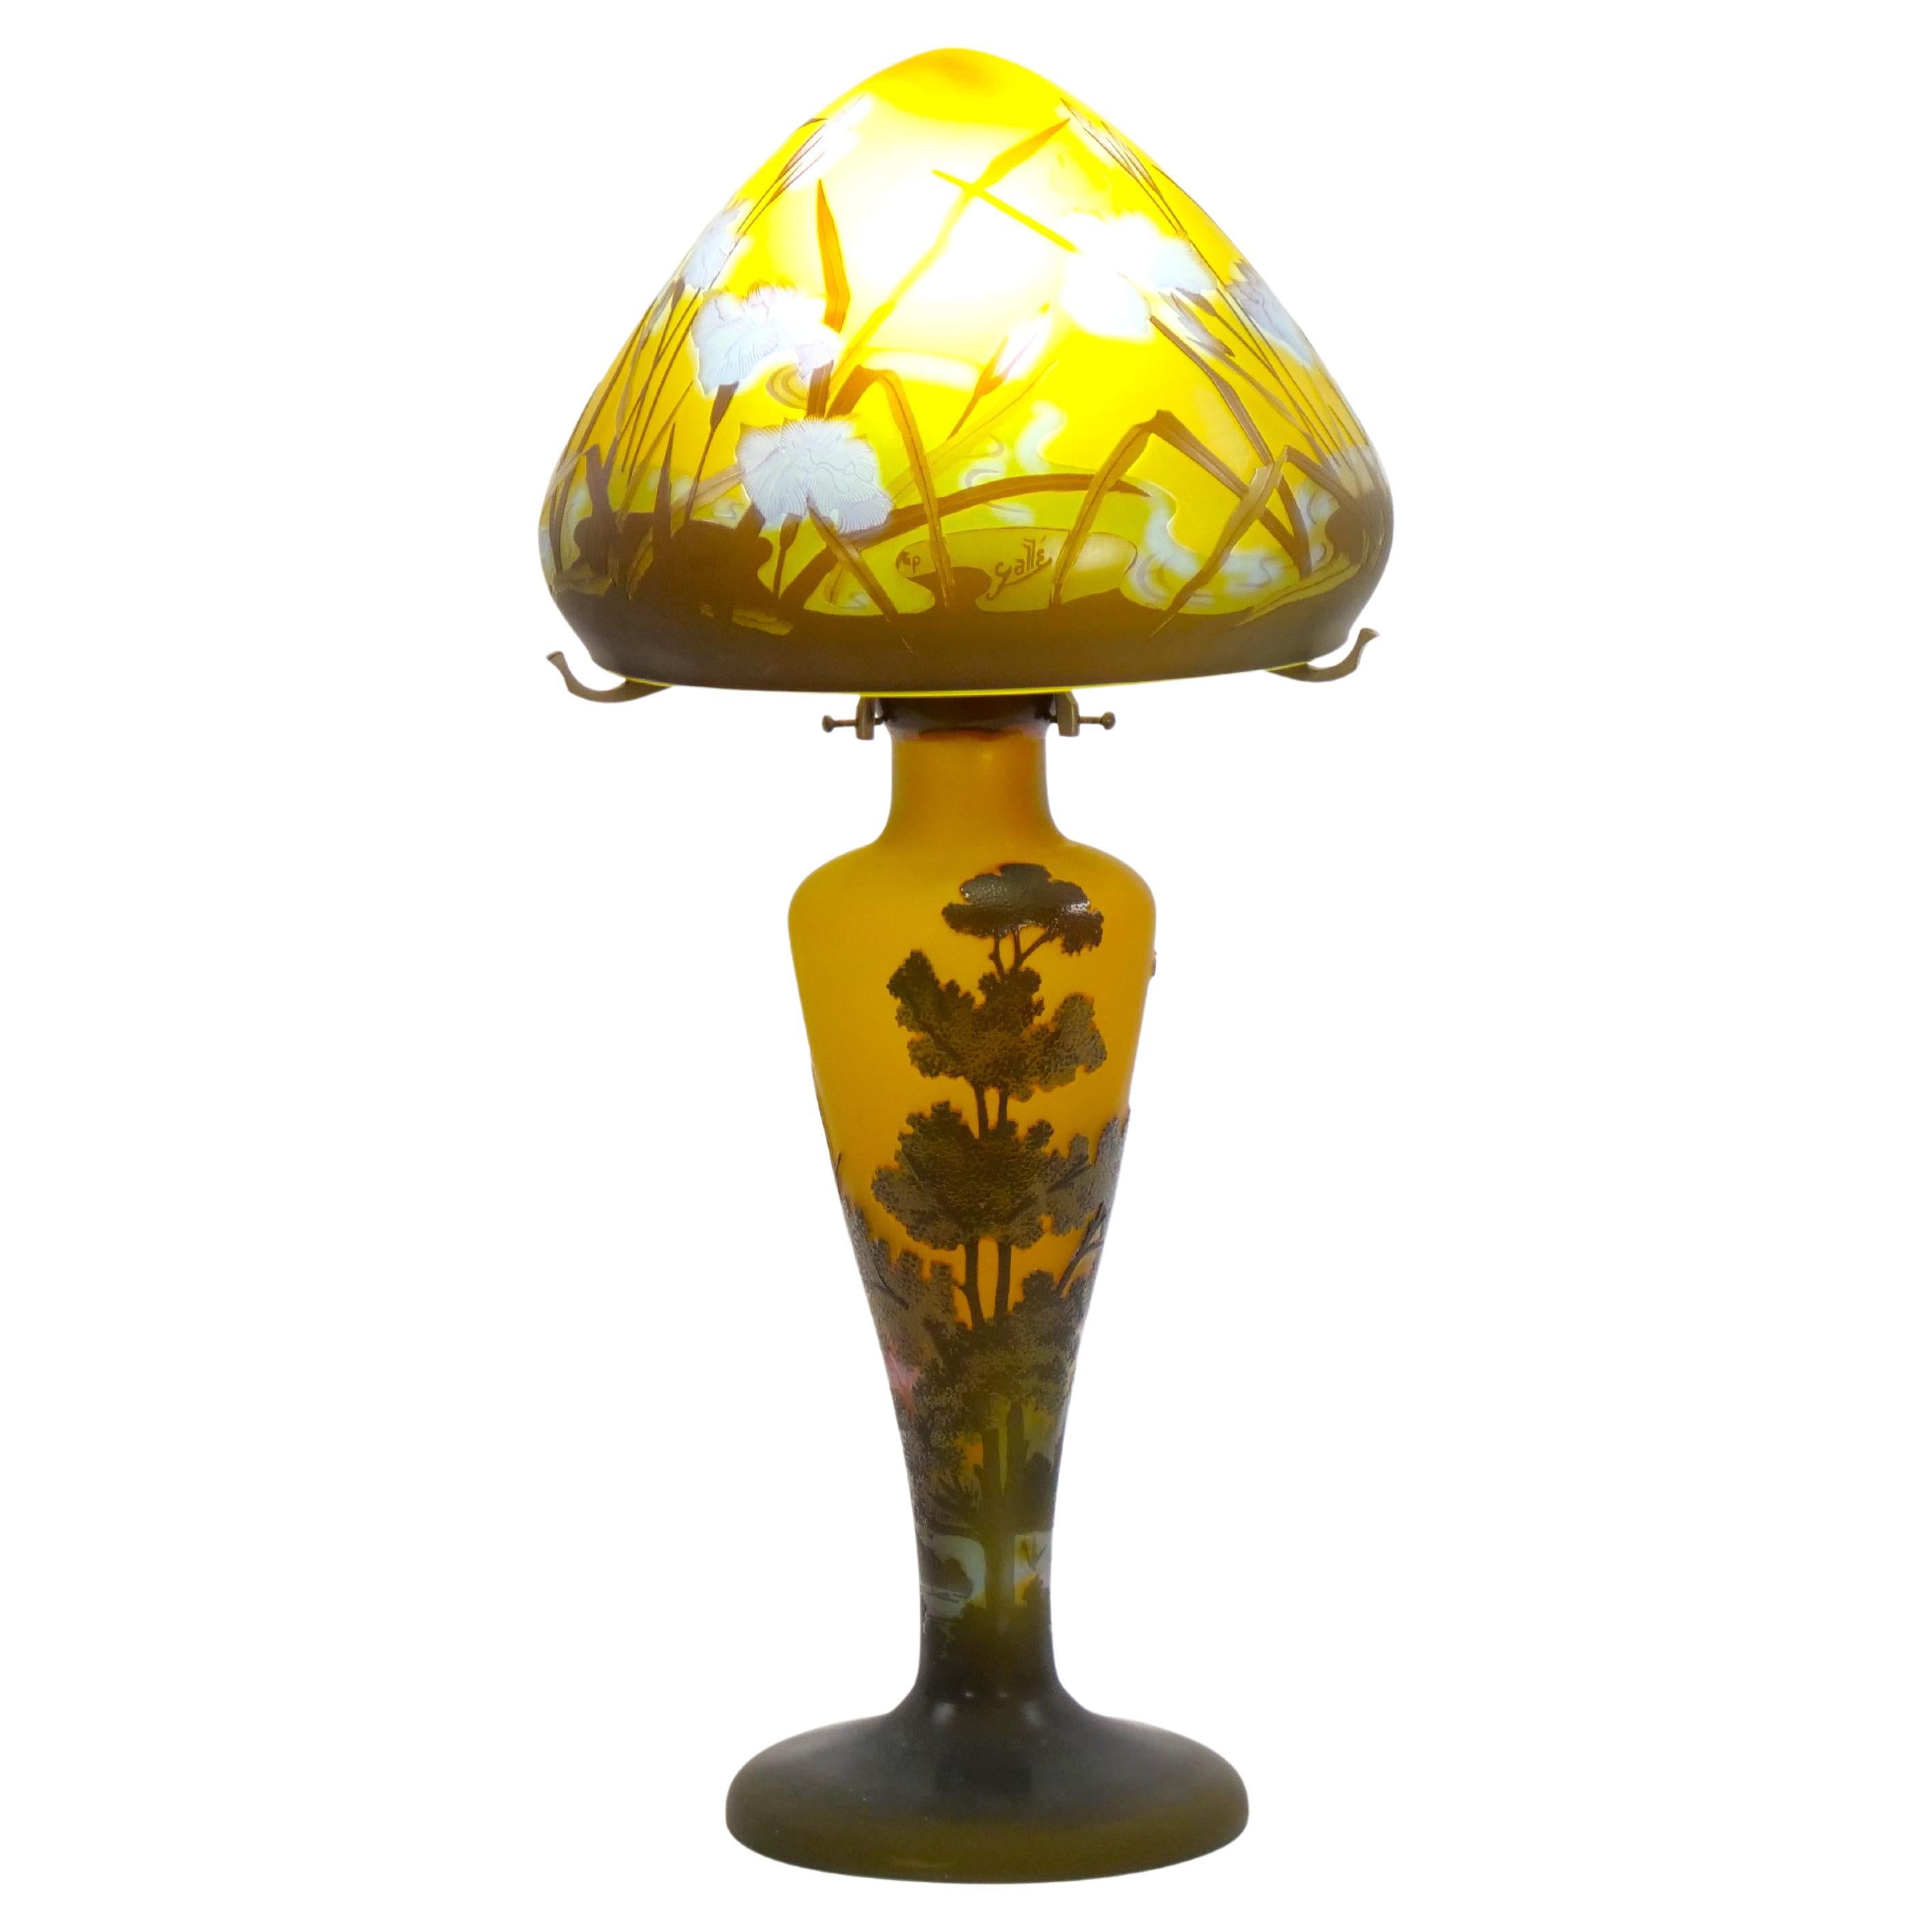 Elevate your decor with a galle cameo glass table lamp that exudes timeless beauty and artistry. Its conical-shaped shade is a masterpiece in itself, capturing the delicate allure of pale violet flowers blooming amidst graceful reeds against an